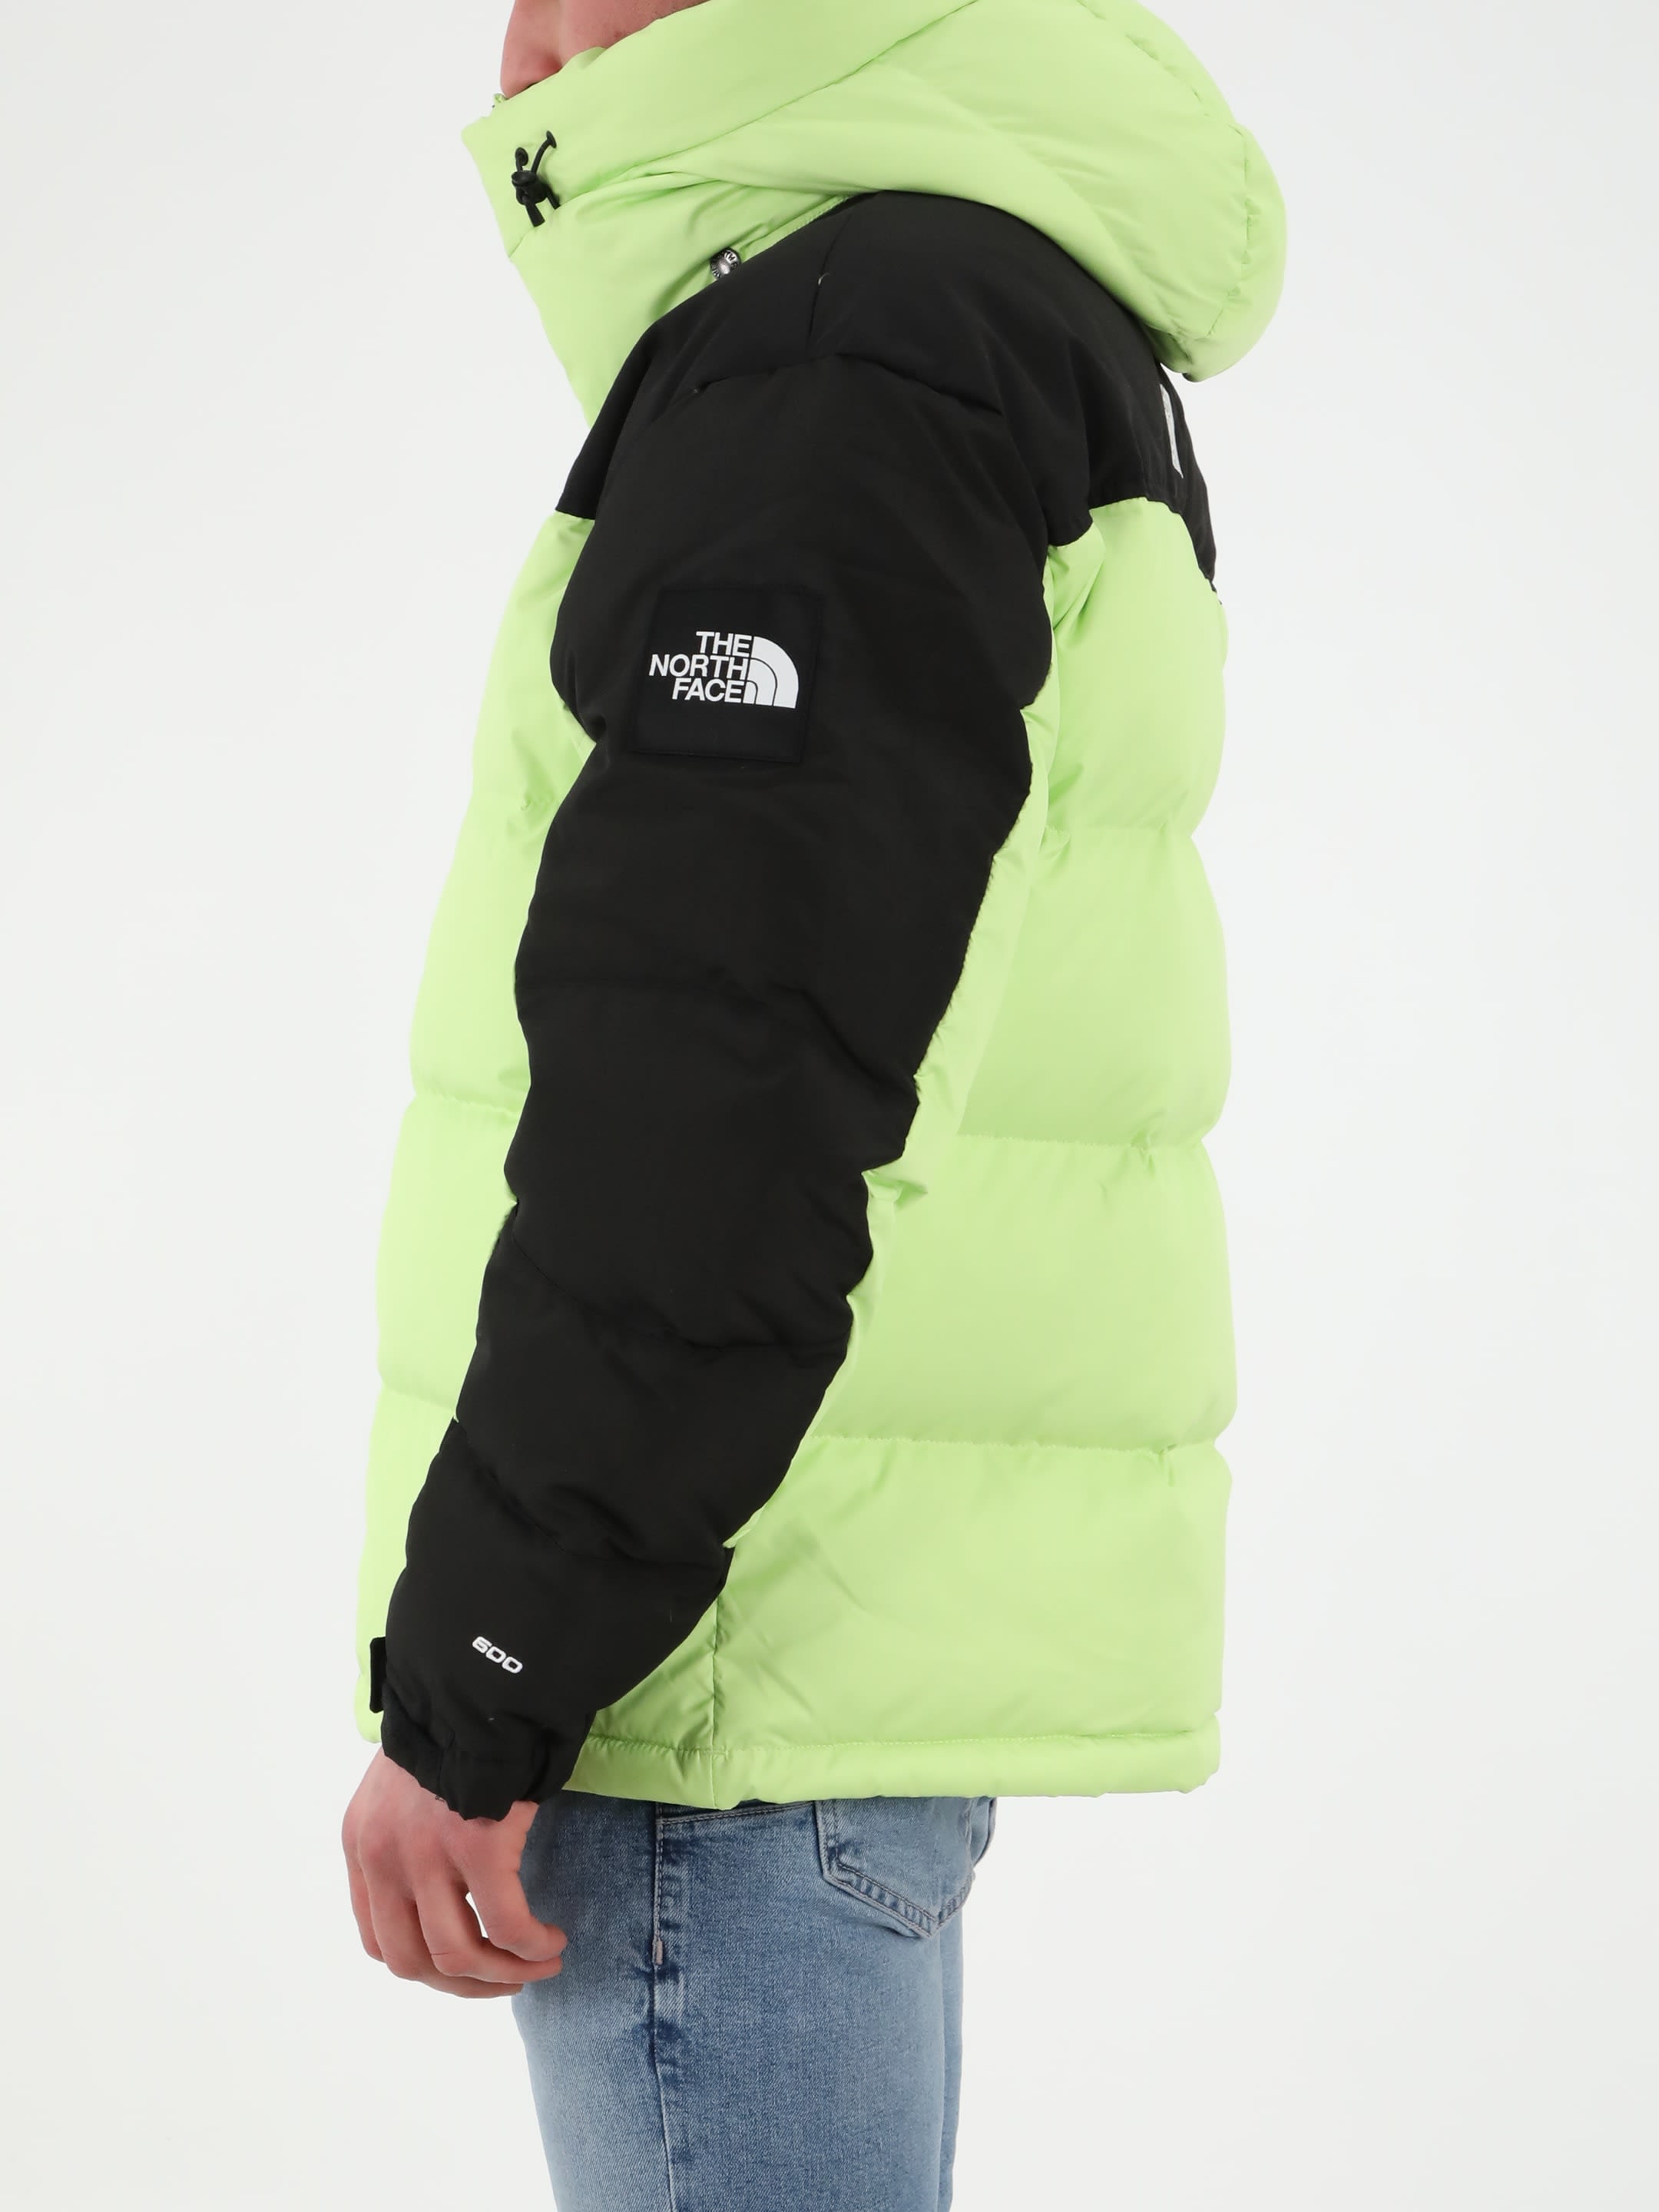 The North Face Search & Rescue Down Jacket | italist